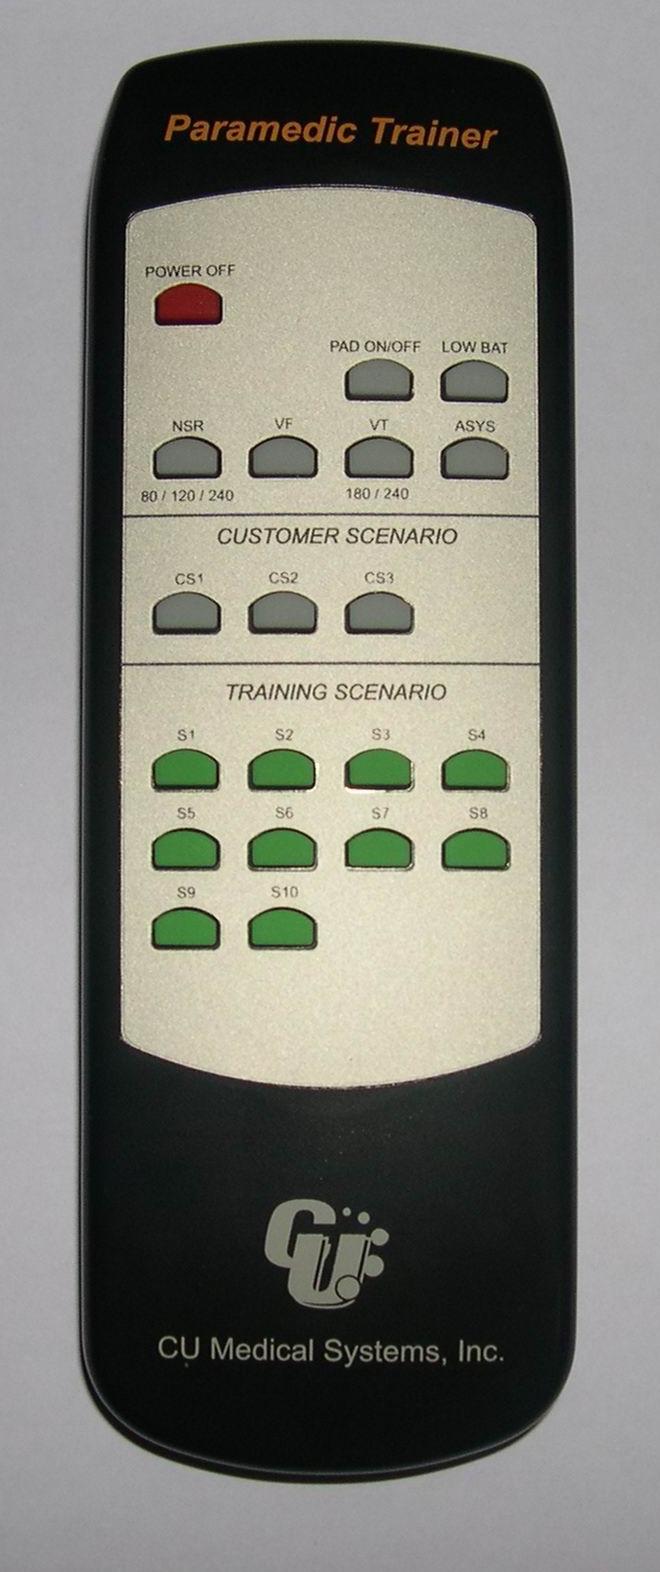 4.7.4 Infrared Remote Controller This enables an instructor to control the Paramedic